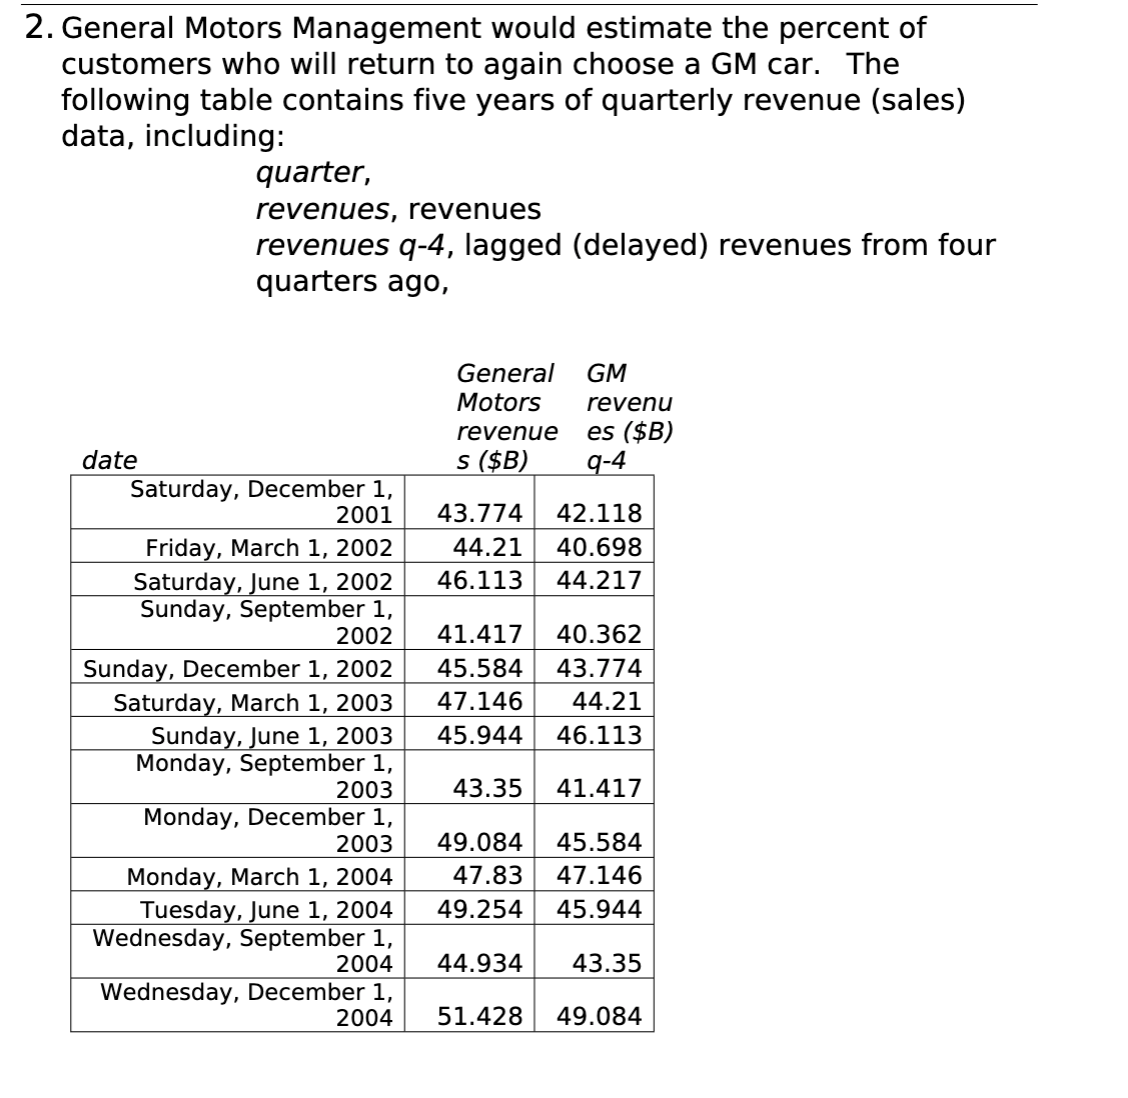 2. General Motors Management would estimate the percent of
customers who will return to again choose a GM car. The
following table contains five years of quarterly revenue (sales)
data, including:
quarter,
revenues, revenues
revenues q-4, lagged (delayed) revenues from four
quarters ago,
General
GM
Motors
revenu
revenue
es ($B)
date
s ($B)
g-4
Saturday, December 1,
2001
43.774
42.118
Friday, March 1, 2002
44.21
40.698
Saturday, June 1, 2002
Sunday, September 1,
2002
46.113
44.217
41.417
40.362
Sunday, December 1, 2002
Saturday, March 1, 2003
Sunday, June 1, 2003
Monday, September 1,
2003
45.584
43.774
47.146
44.21
45.944
46.113
43.35
41.417
Monday, December 1,
2003
49.084
45.584
4
Monday, March 1, 2004
Tuesday, June 1, 2004
Wednesday, September 1,
47.83
49.254
45.944
2004
44.934
43.35
Wednesday, December 1,
2004
51.428
49.084
